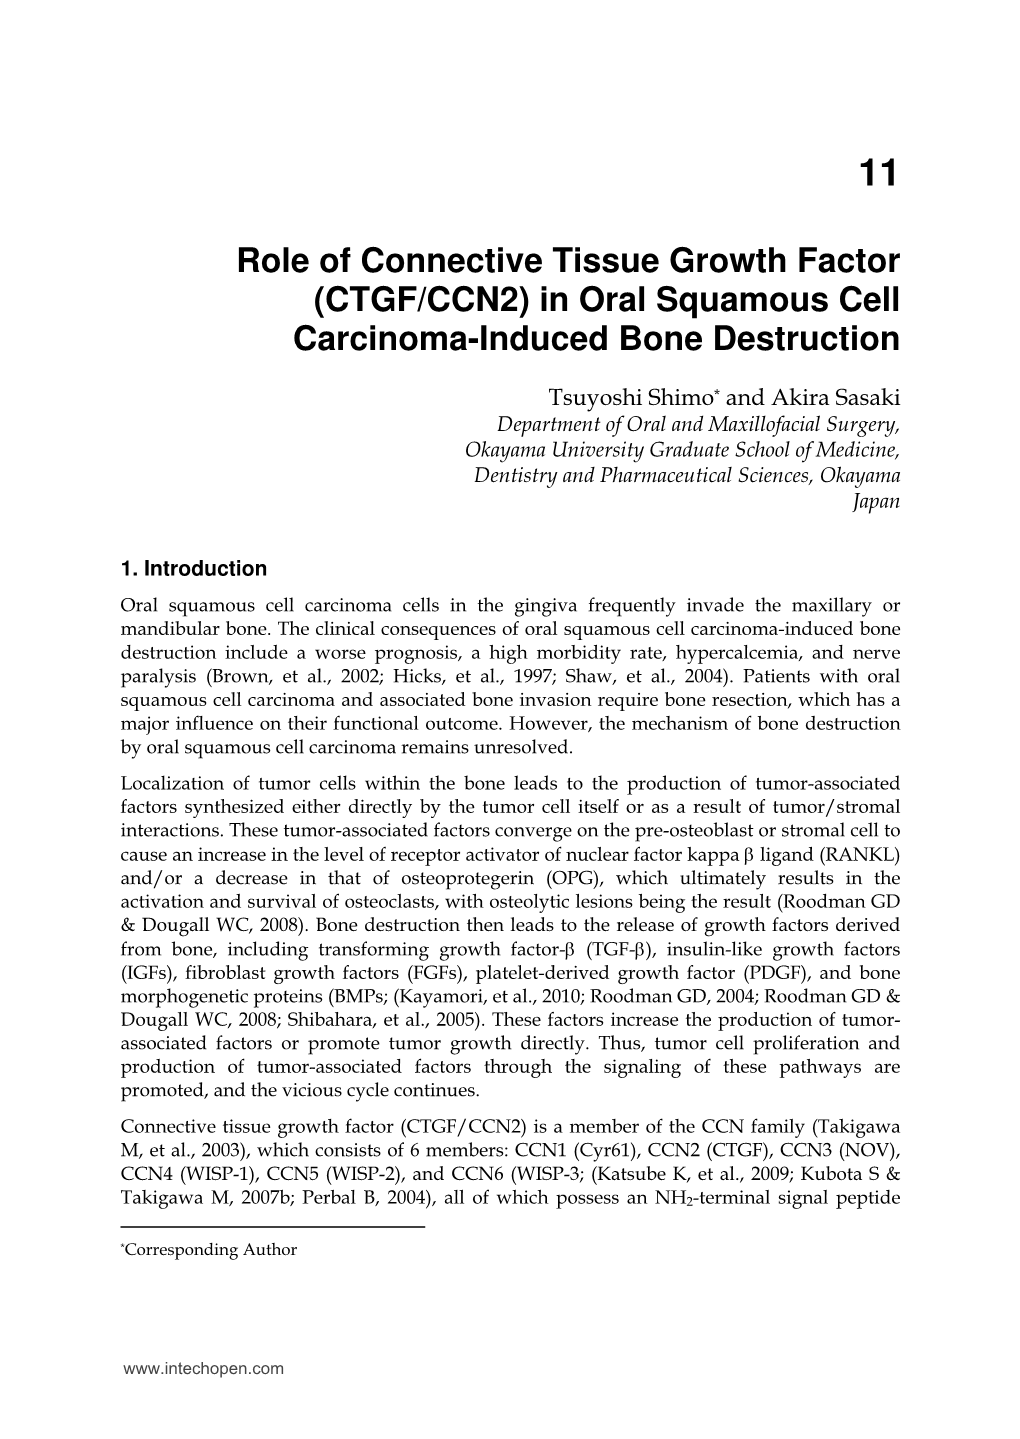 Role of Connective Tissue Growth Factor (CTGF/CCN2) in Oral Squamous Cell Carcinoma-Induced Bone Destruction